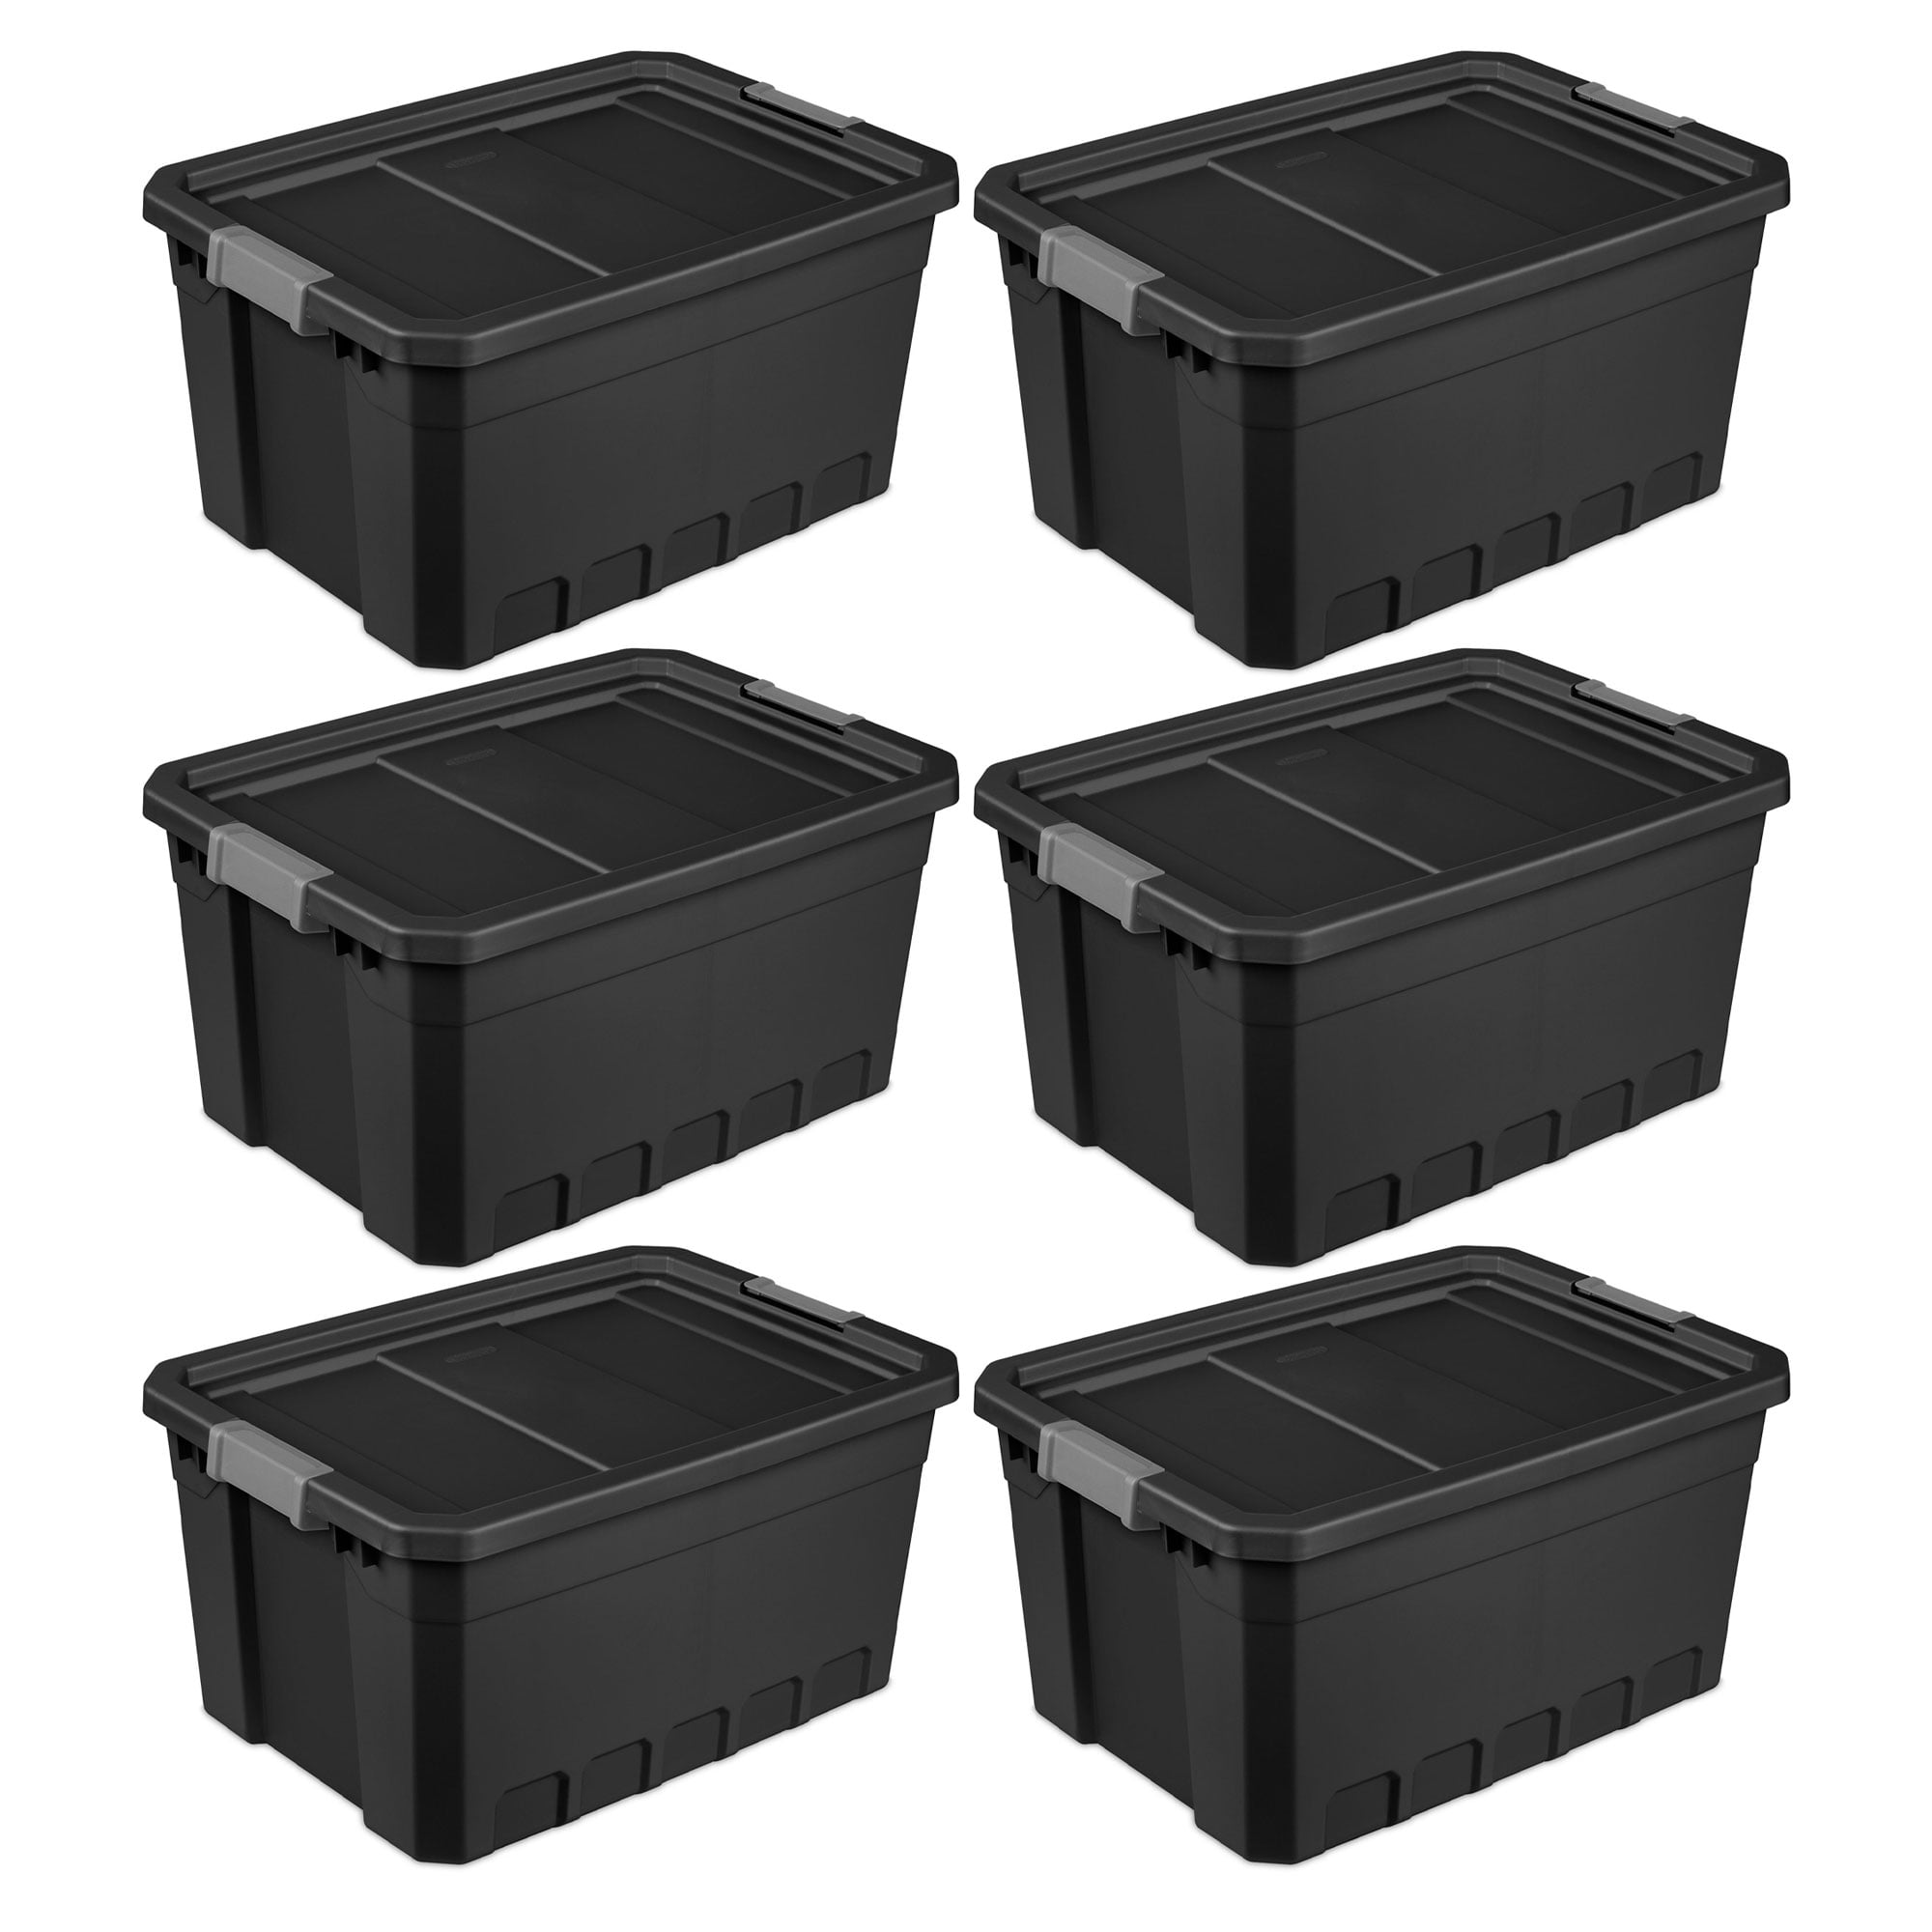 Details about   Sterilite Plastic Storage Containers Industrial Tote Stackable Box 19 Gal  6Pc 